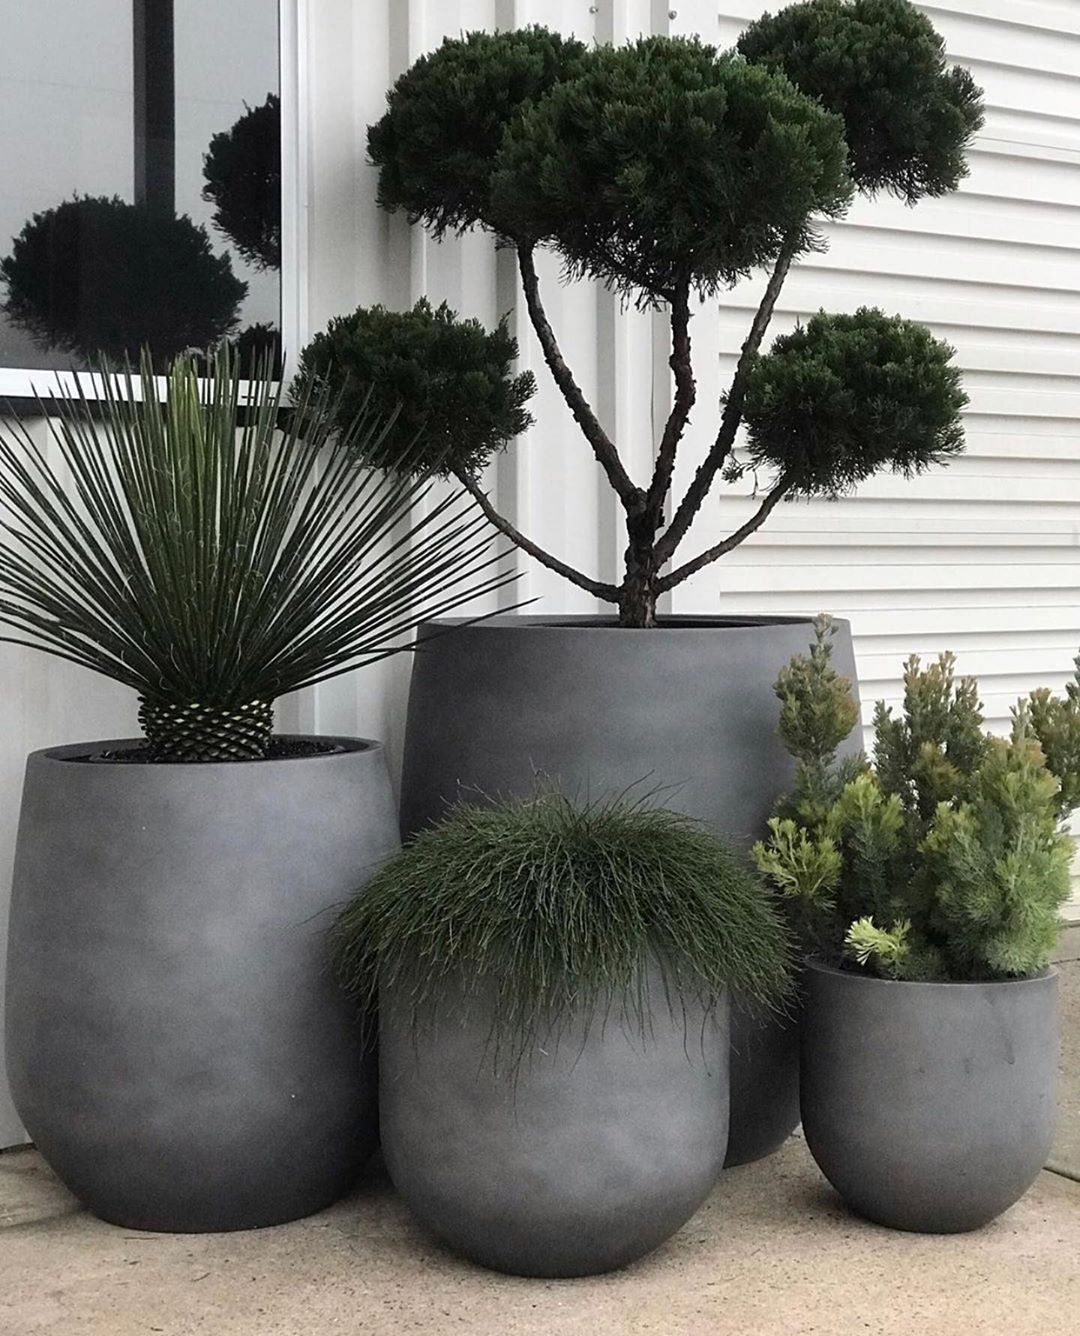 Creating a Beautiful Outdoor Oasis with Potted Plants